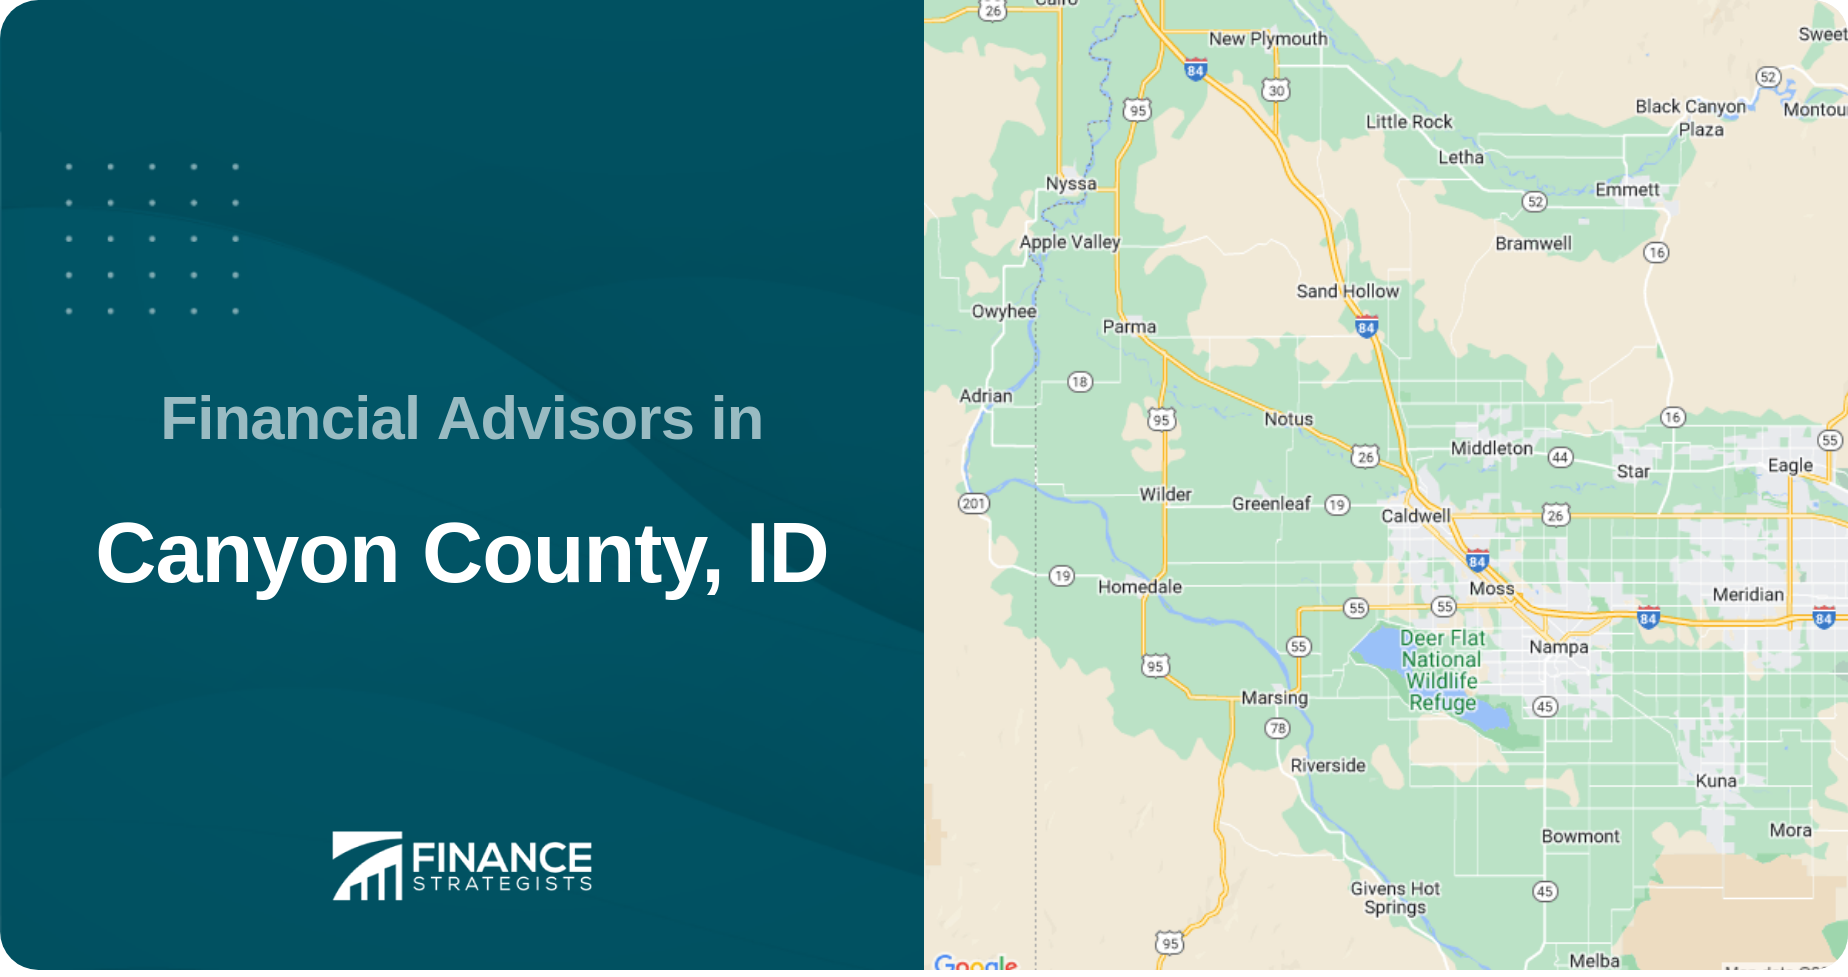 Financial Advisors in Canyon County, ID